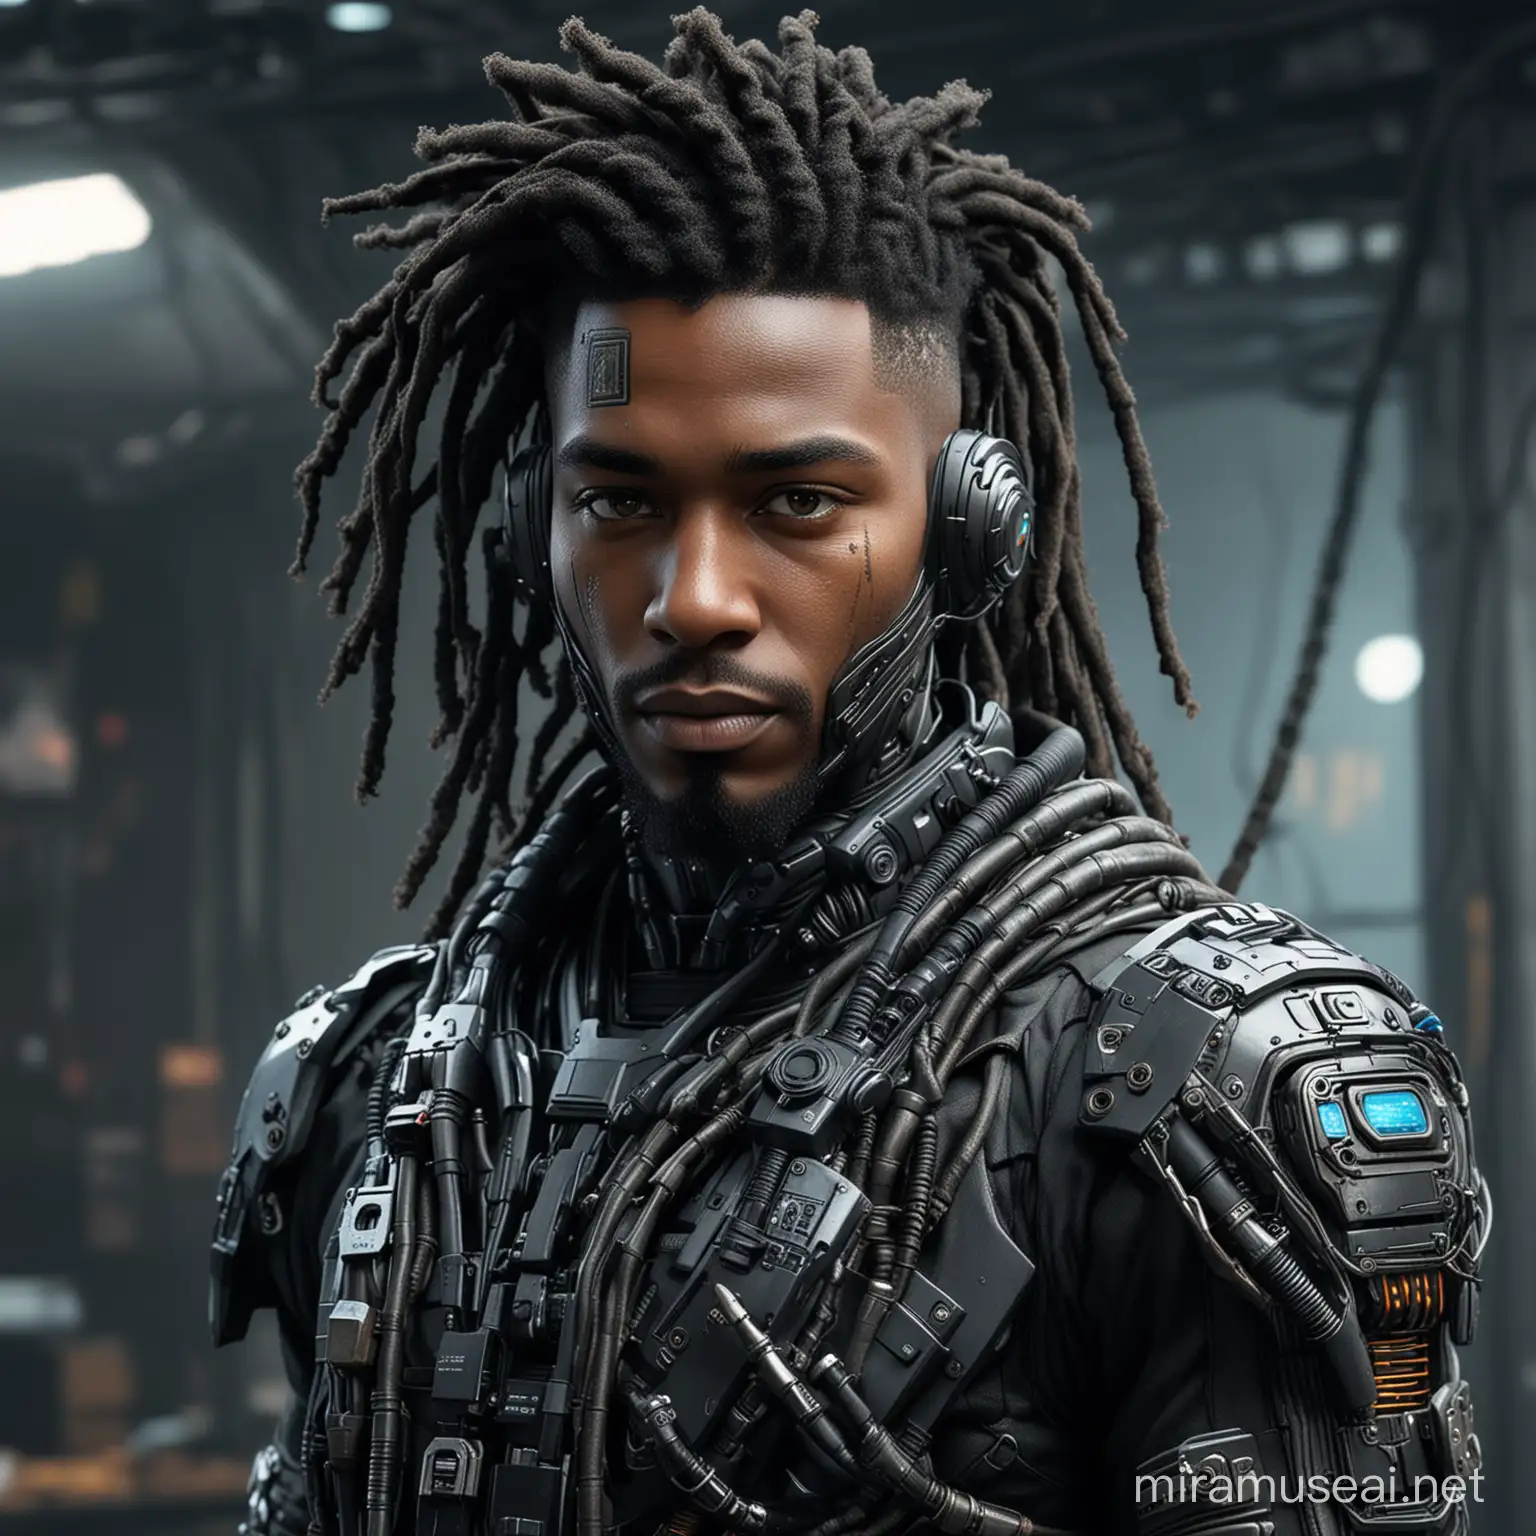 Cyberpunk Black Male Mech Pilot with Electronic Cable Dreads in Suit